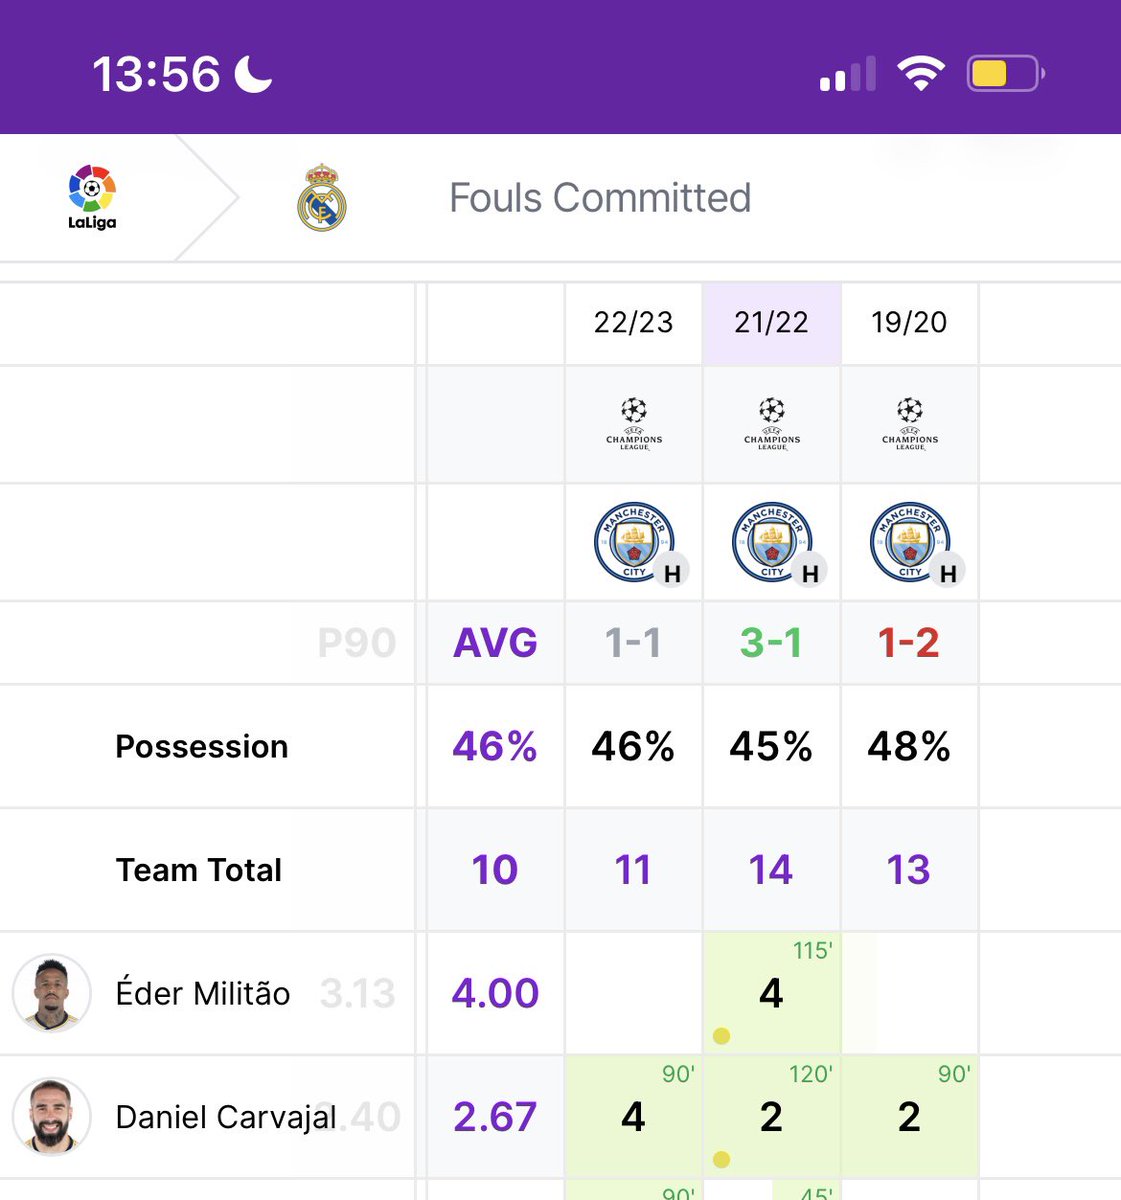 🇪🇸Real Madrid vs Man City🏴󠁧󠁢󠁥󠁮󠁧󠁿 Grealish coming into form and potentially earned himself a start tonight against Madrid. If so this price on Carvajal 2+ fouls is very generous. Last 3 H2Hs at the Bernabéu Carvajal has committed 2+ fouls and in the most recent 4 vs Grealish. 1.5…